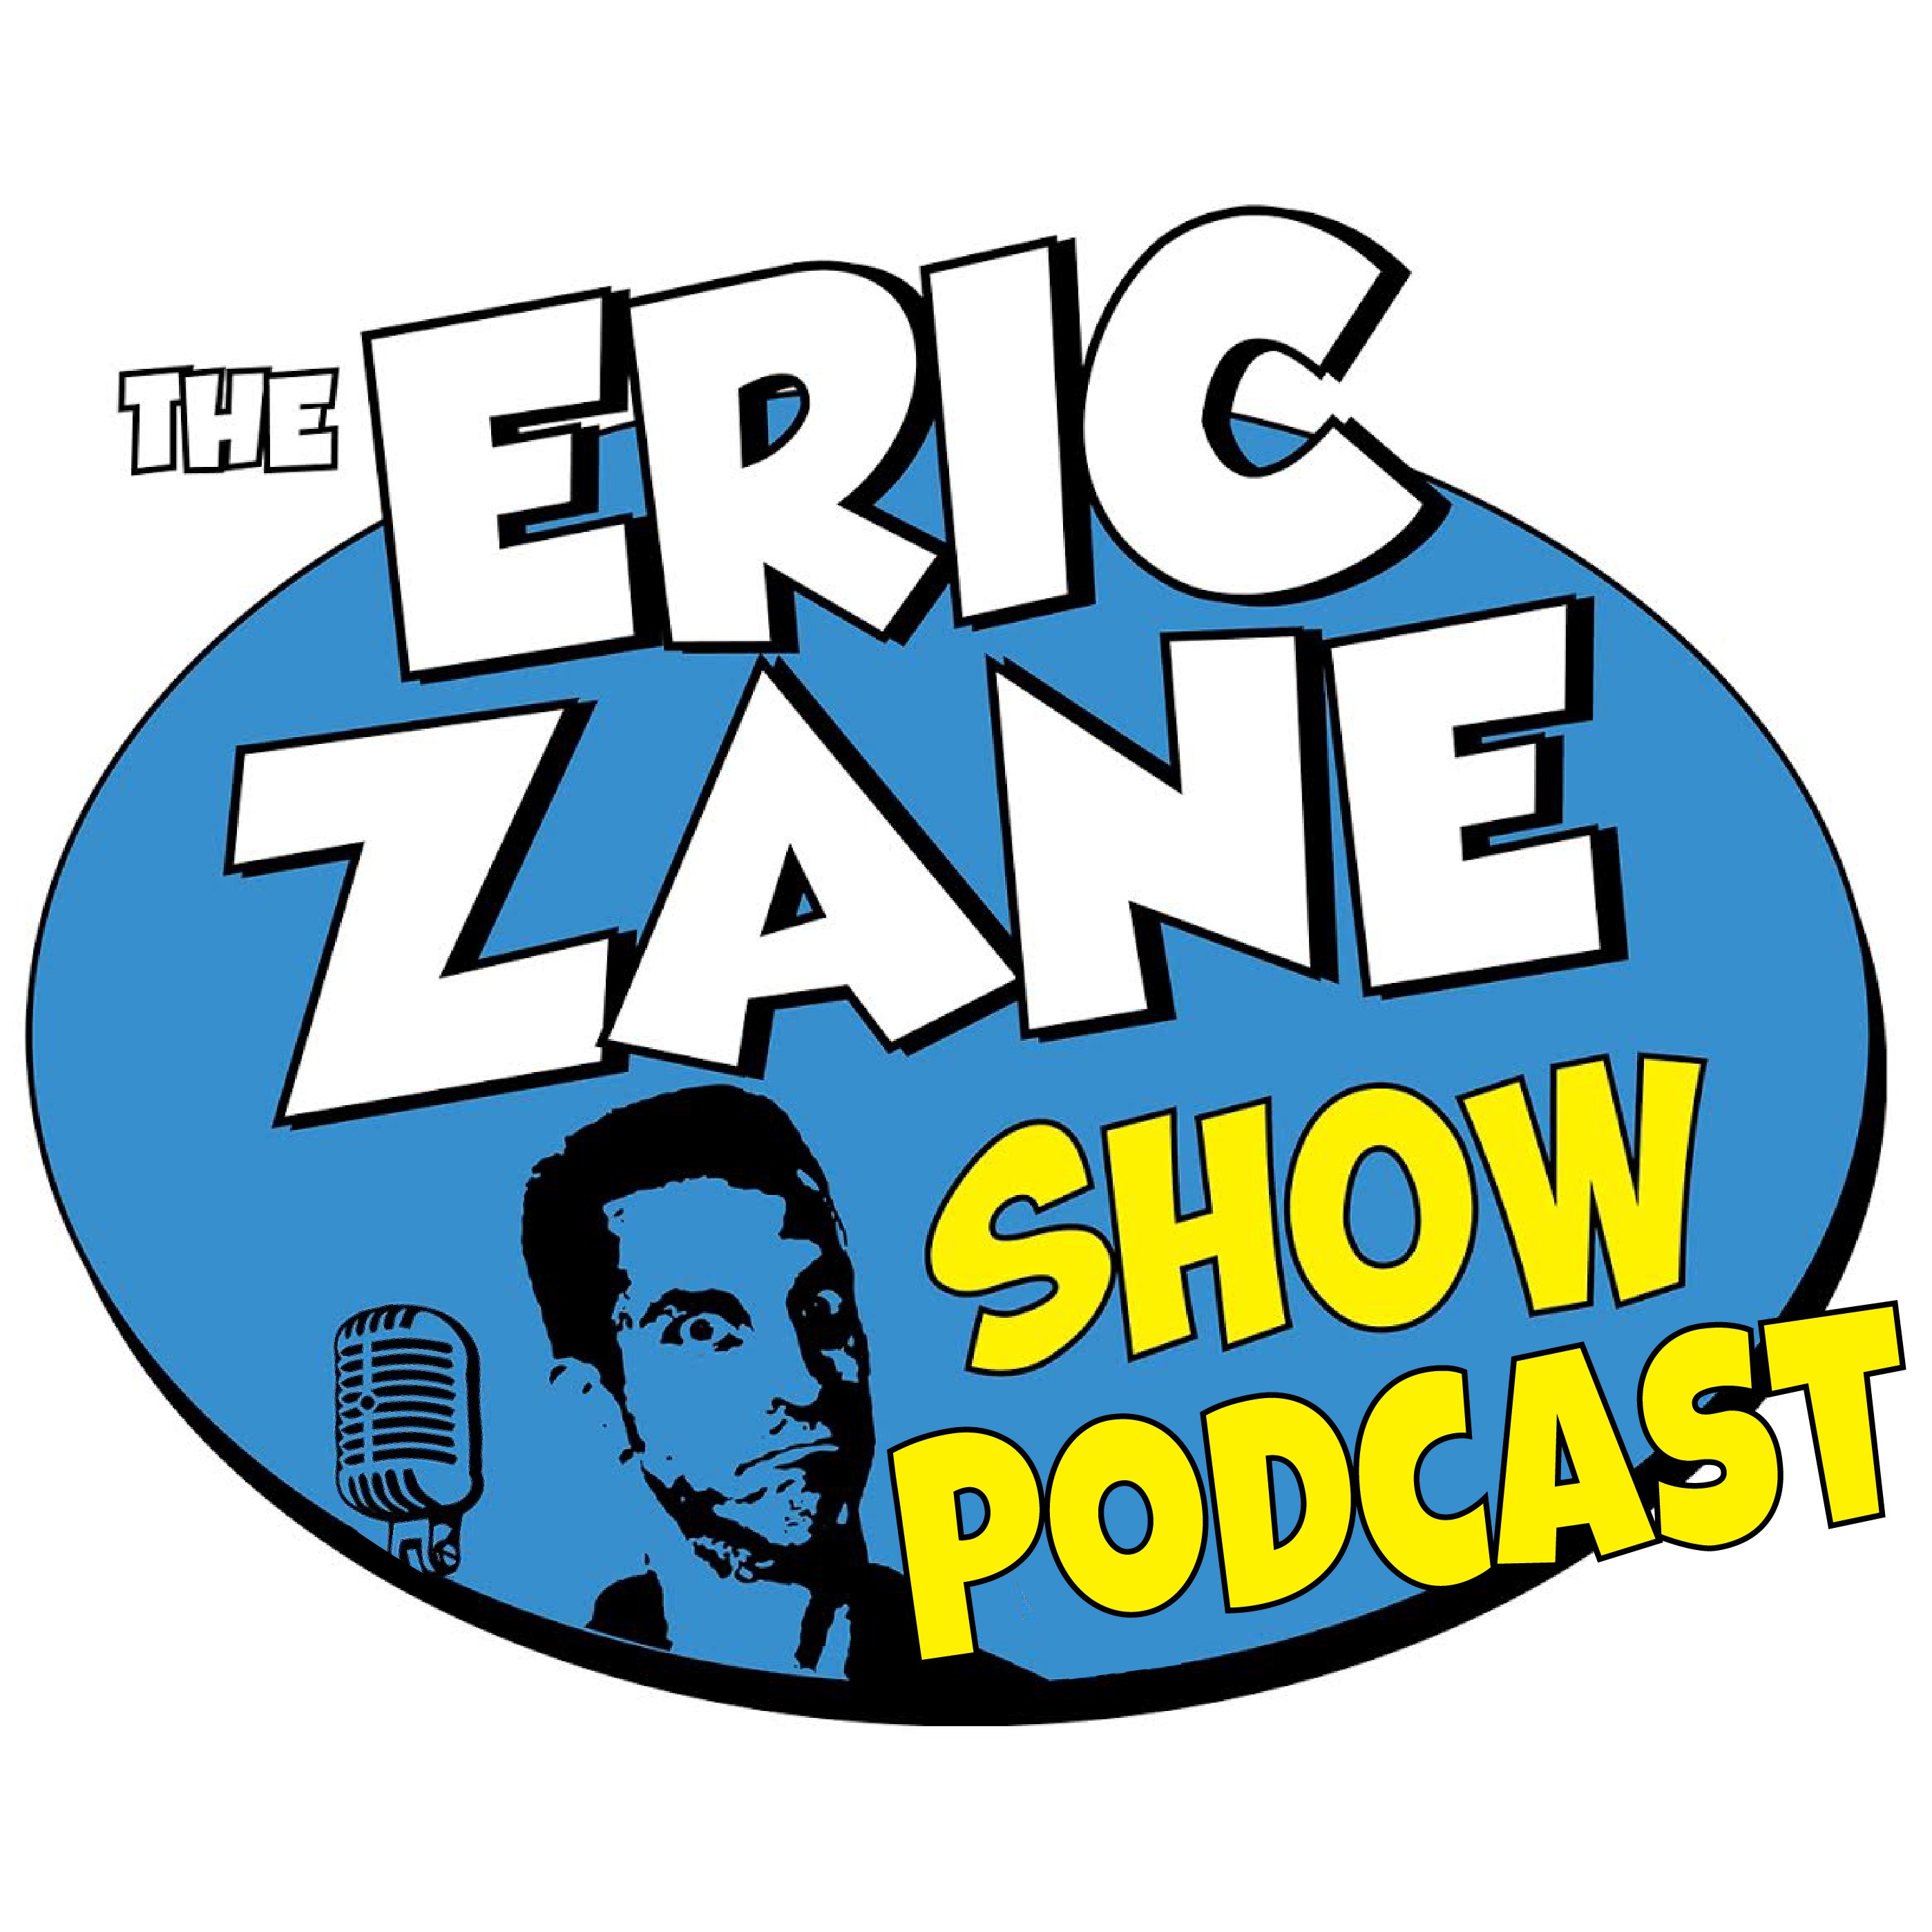 Eric Zane Show Podcast 984 - What's wrong with being a drag queen?